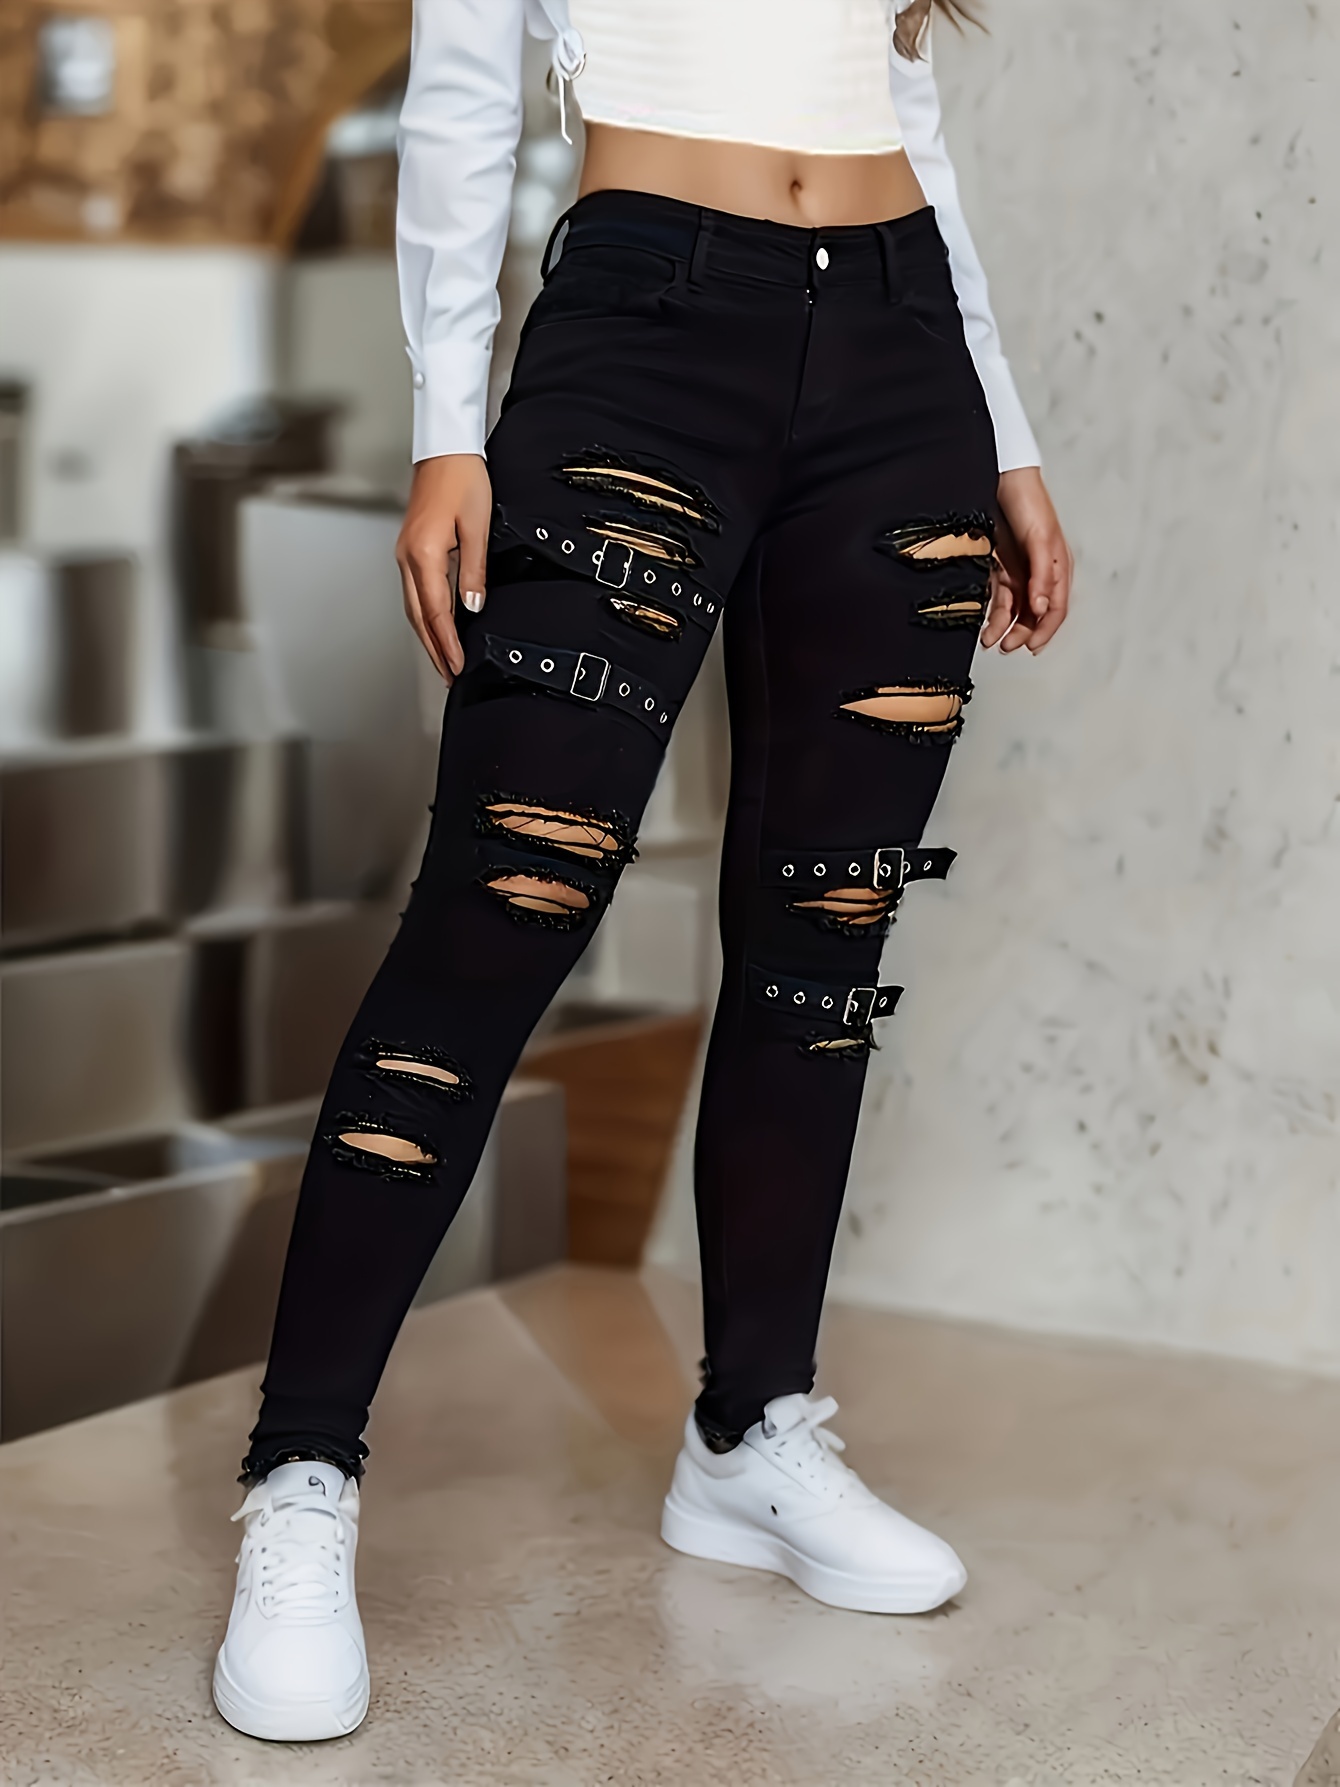 Women's Gothic Jeans from Attitude Clothing